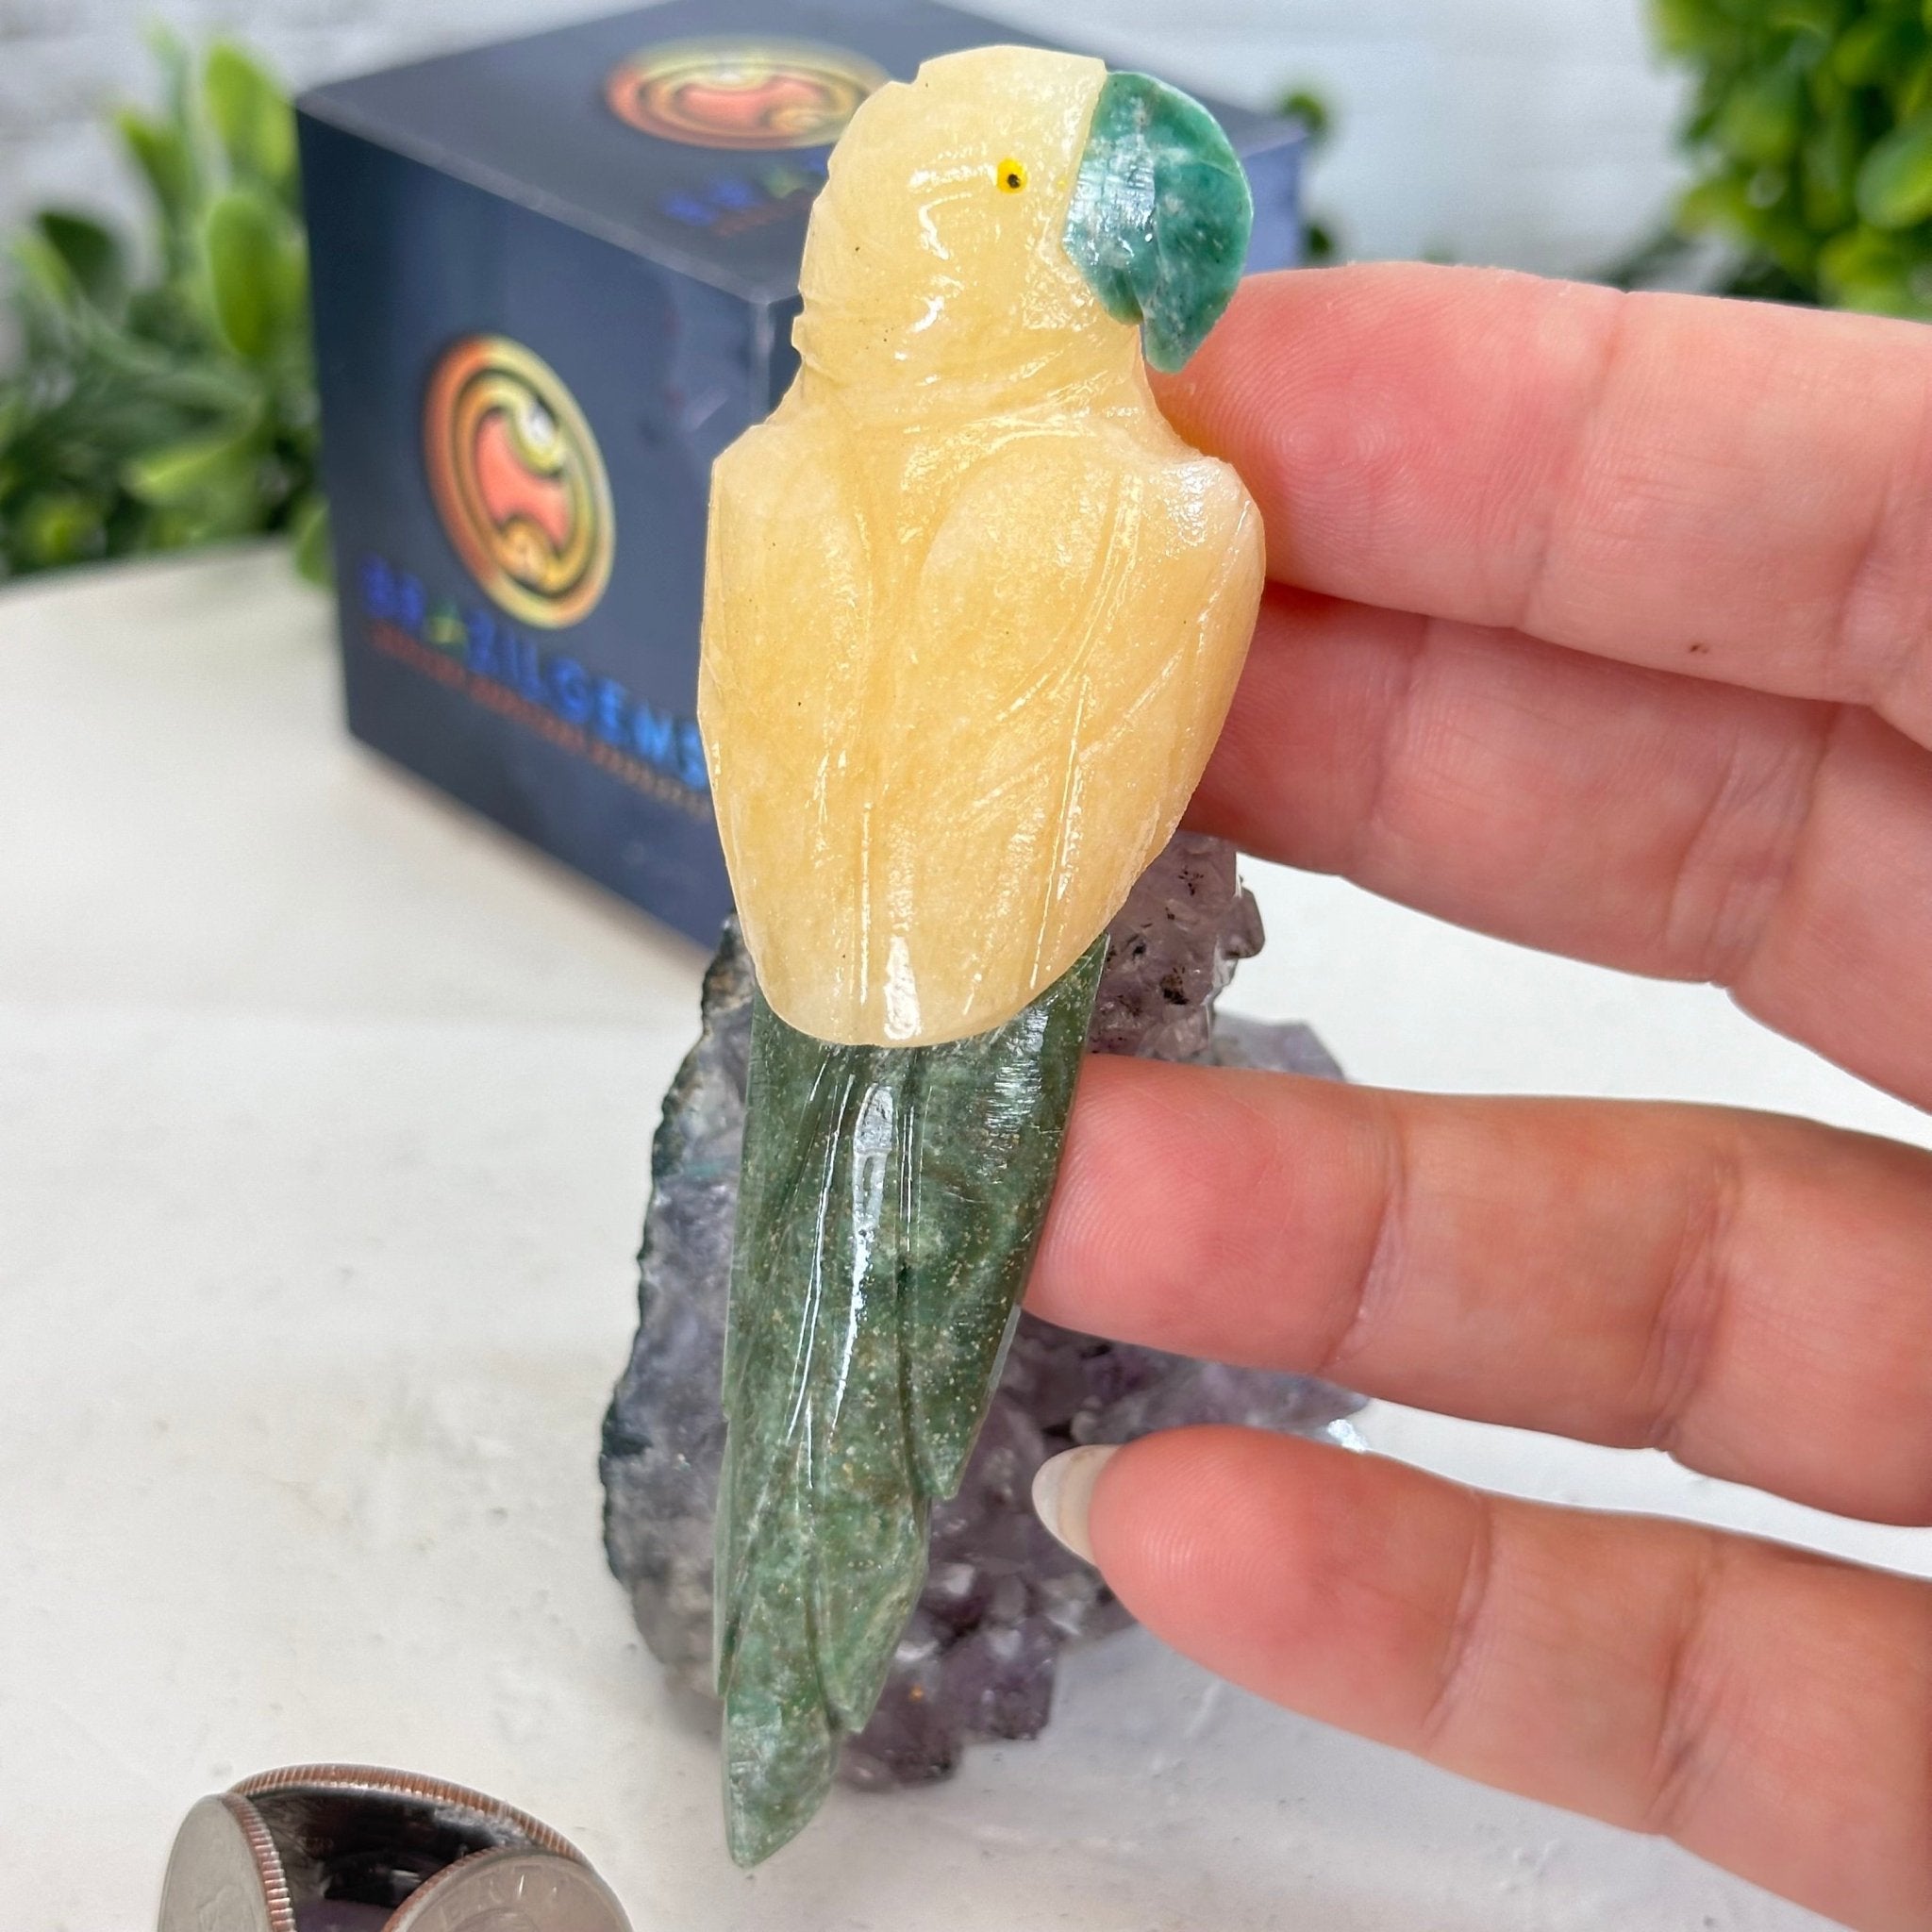 Hand-Carved Crystal Bird, Yellow Calcite Parrot, Amethyst Base, 4.6" Tall #3001-YCPAM-030 - Brazil GemsBrazil GemsHand-Carved Crystal Bird, Yellow Calcite Parrot, Amethyst Base, 4.6" Tall #3001-YCPAM-030Crystal Birds3001-YCPAM-030